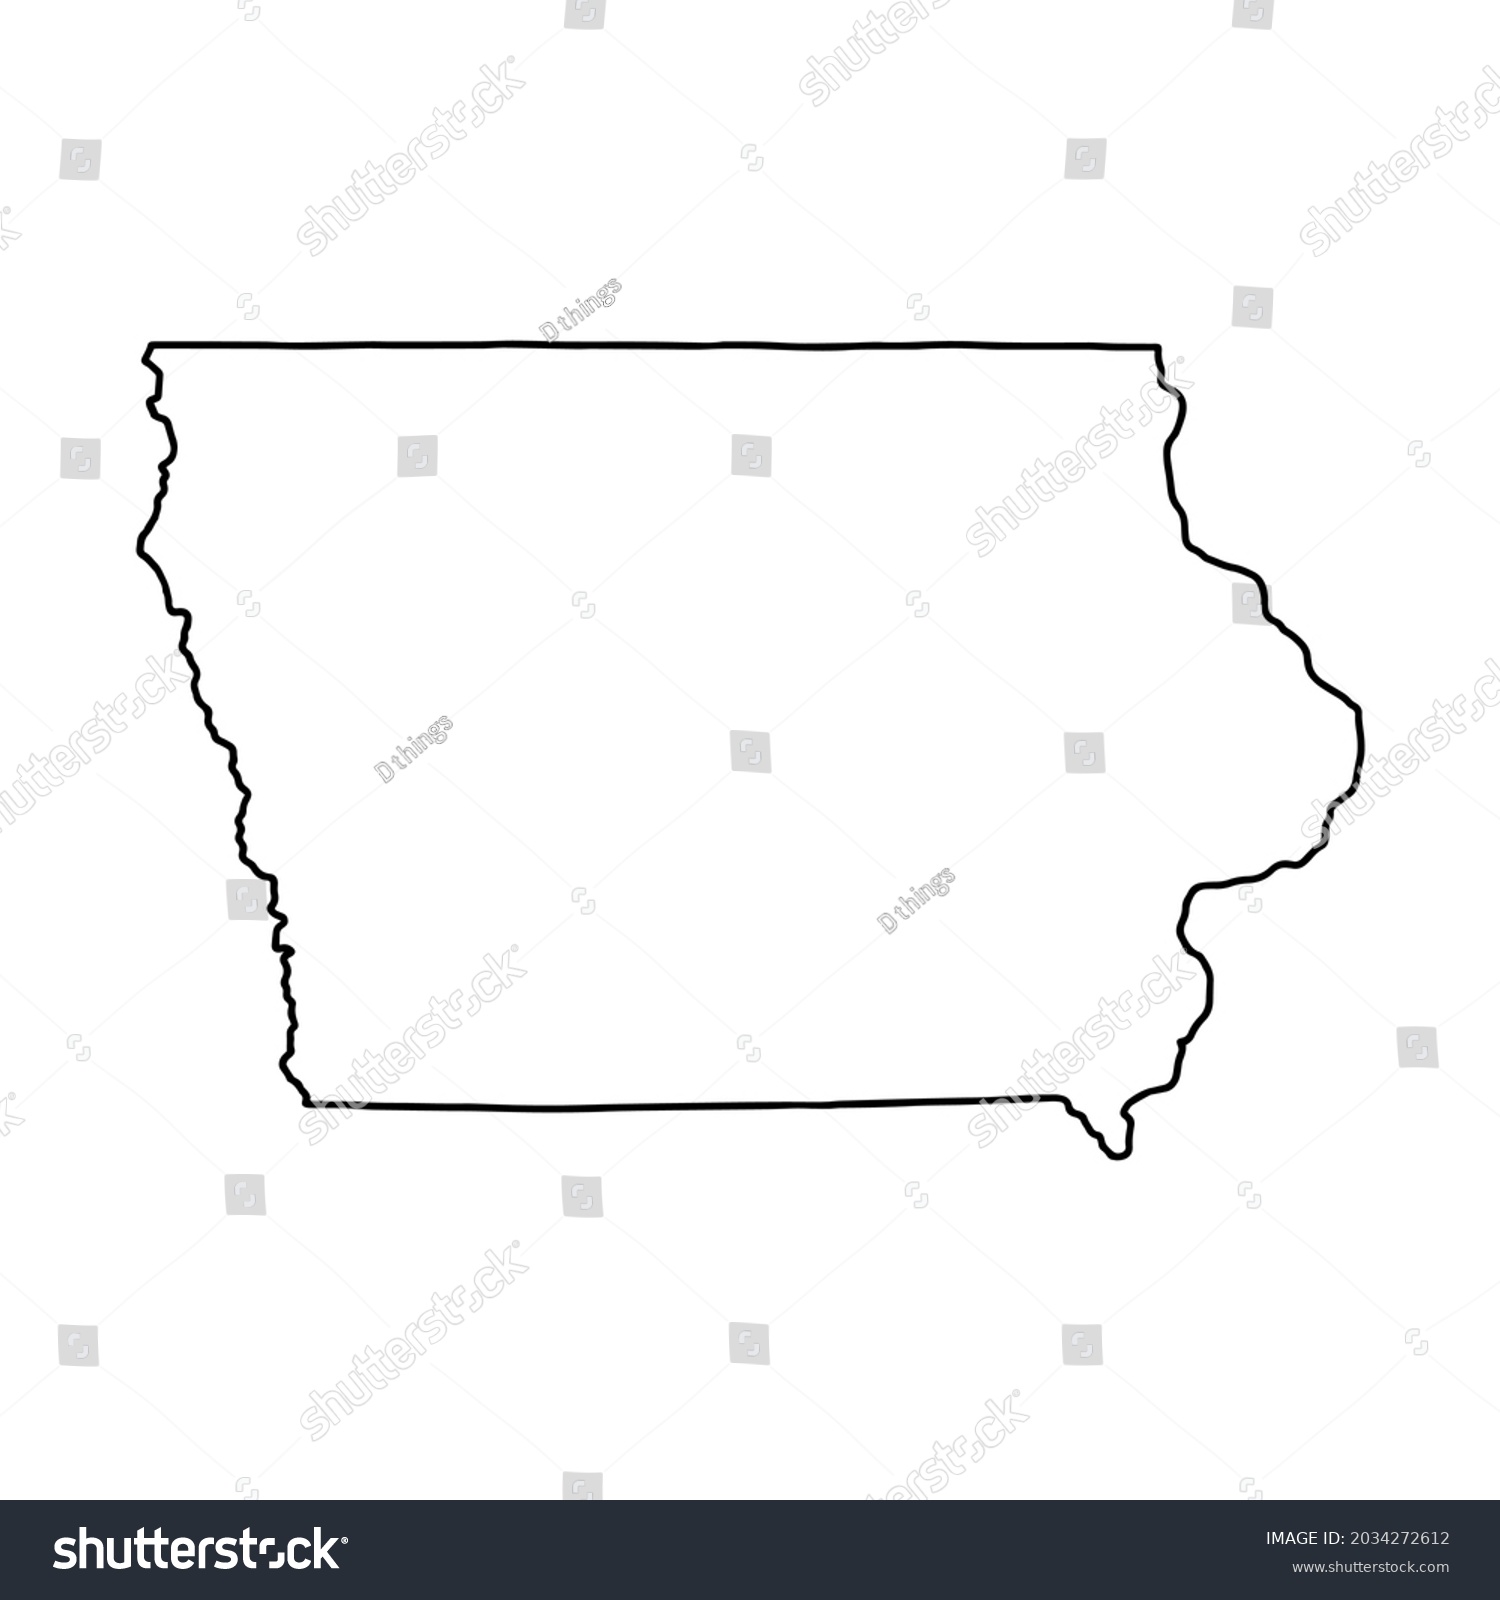 Outline Map Of Iowa White Background Usa State Royalty Free Stock Vector 2034272612 8231